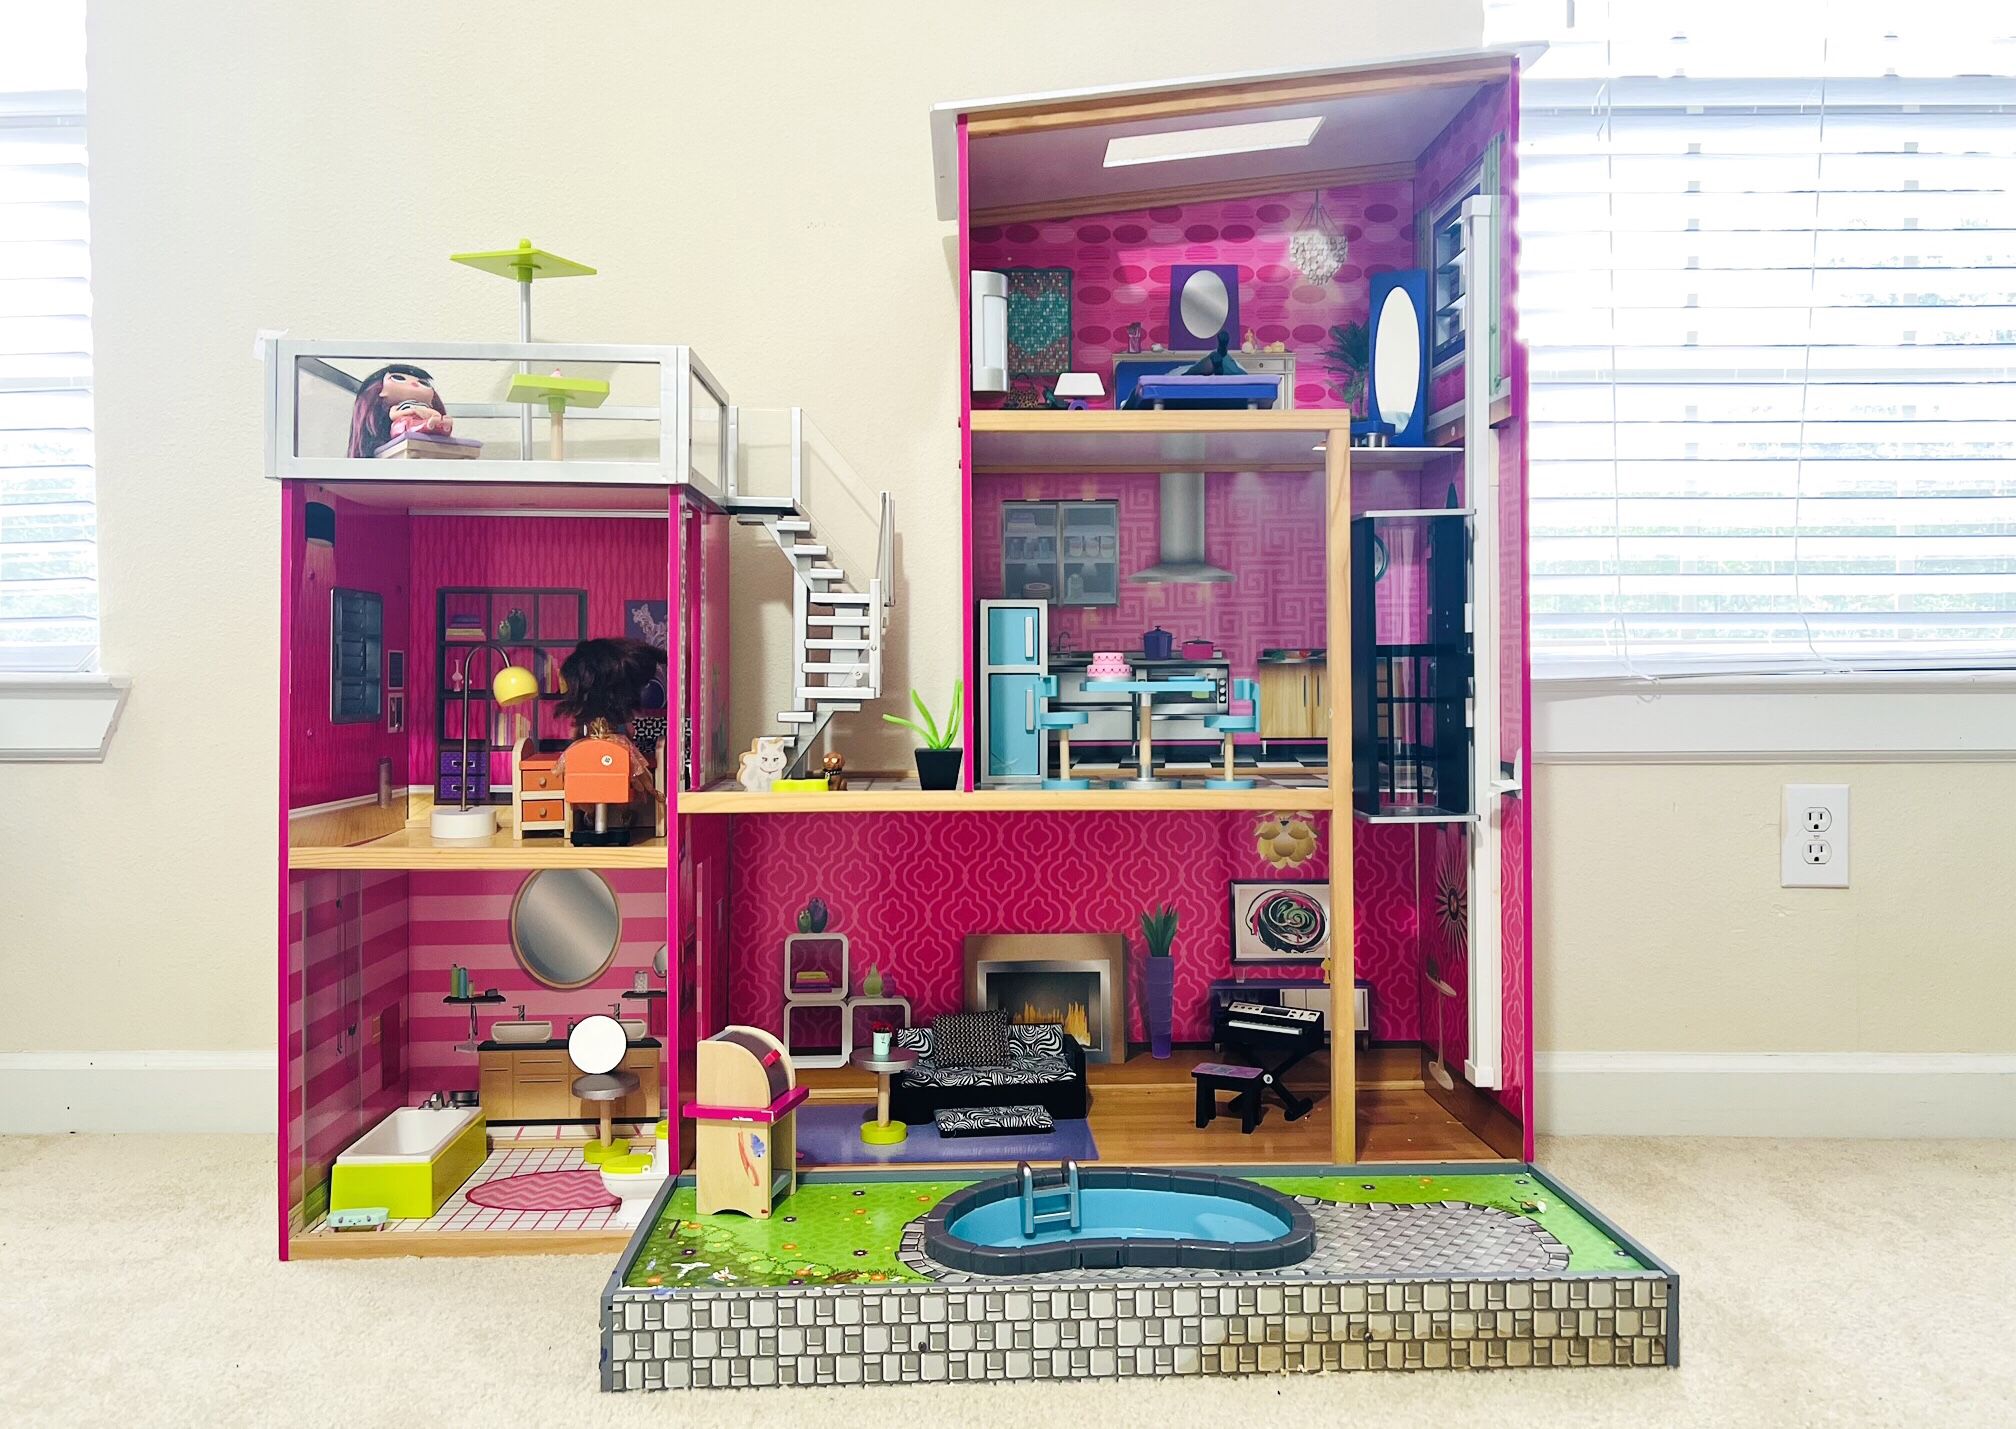 3 Story Kids Doll House With Dolls